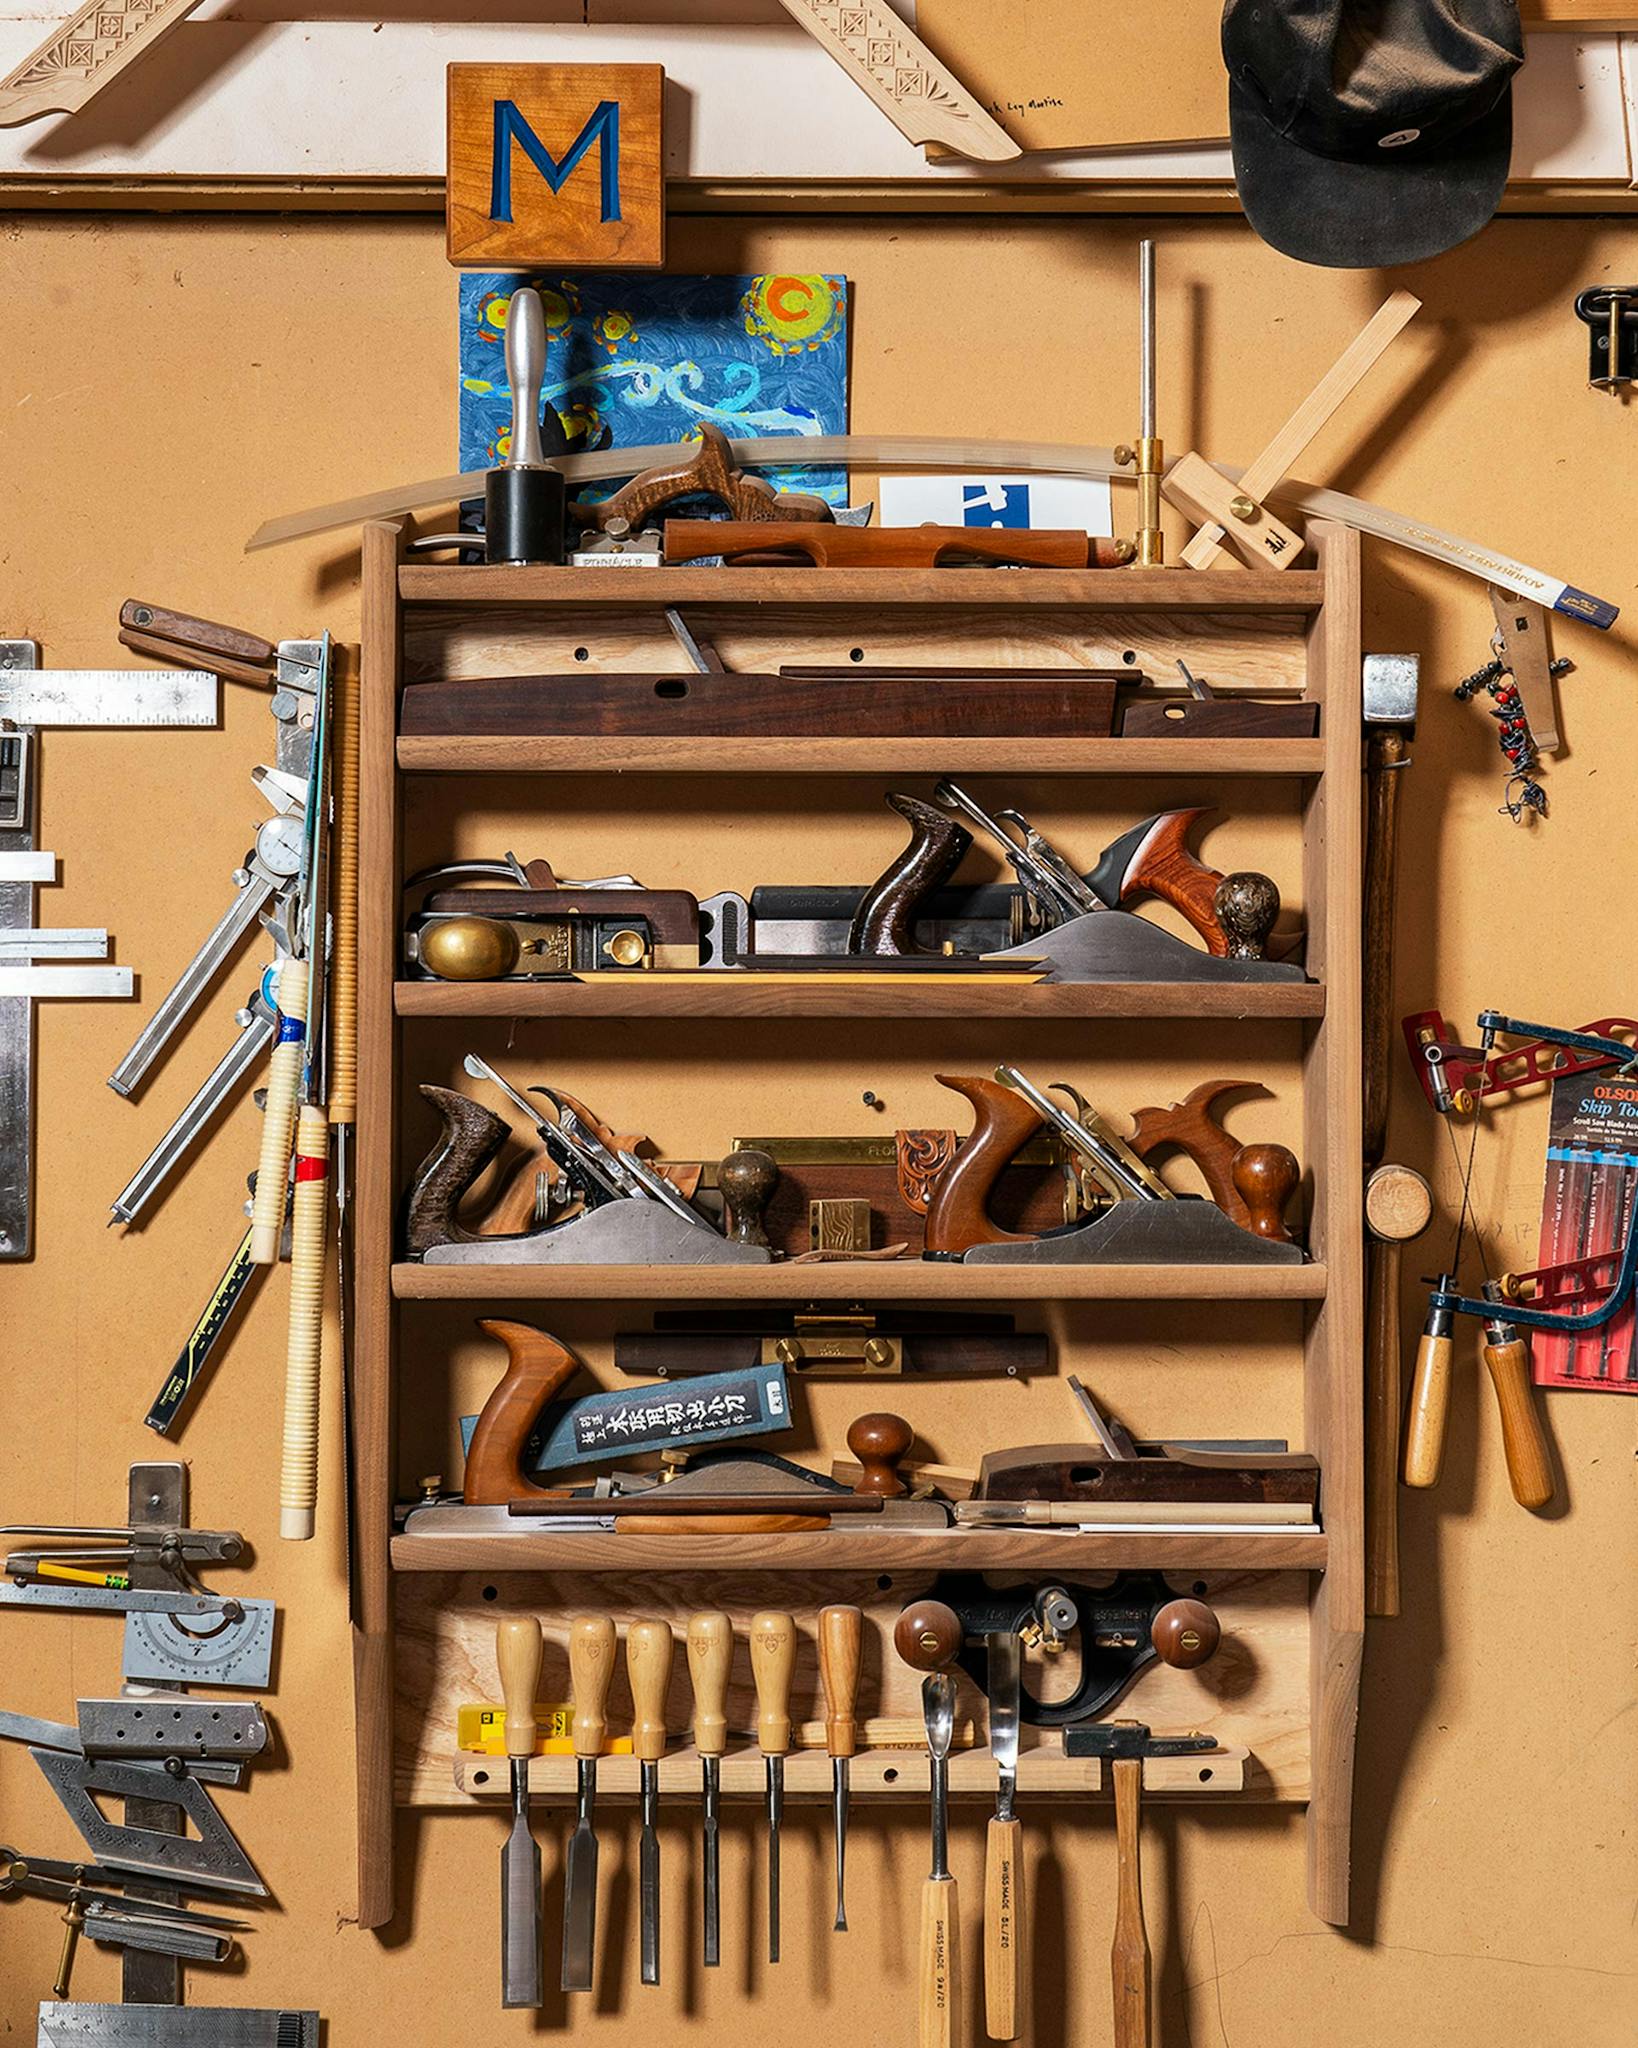 A tool rack which holds the various hand planes, saws, and other hand tools that Morley uses in his various projects.